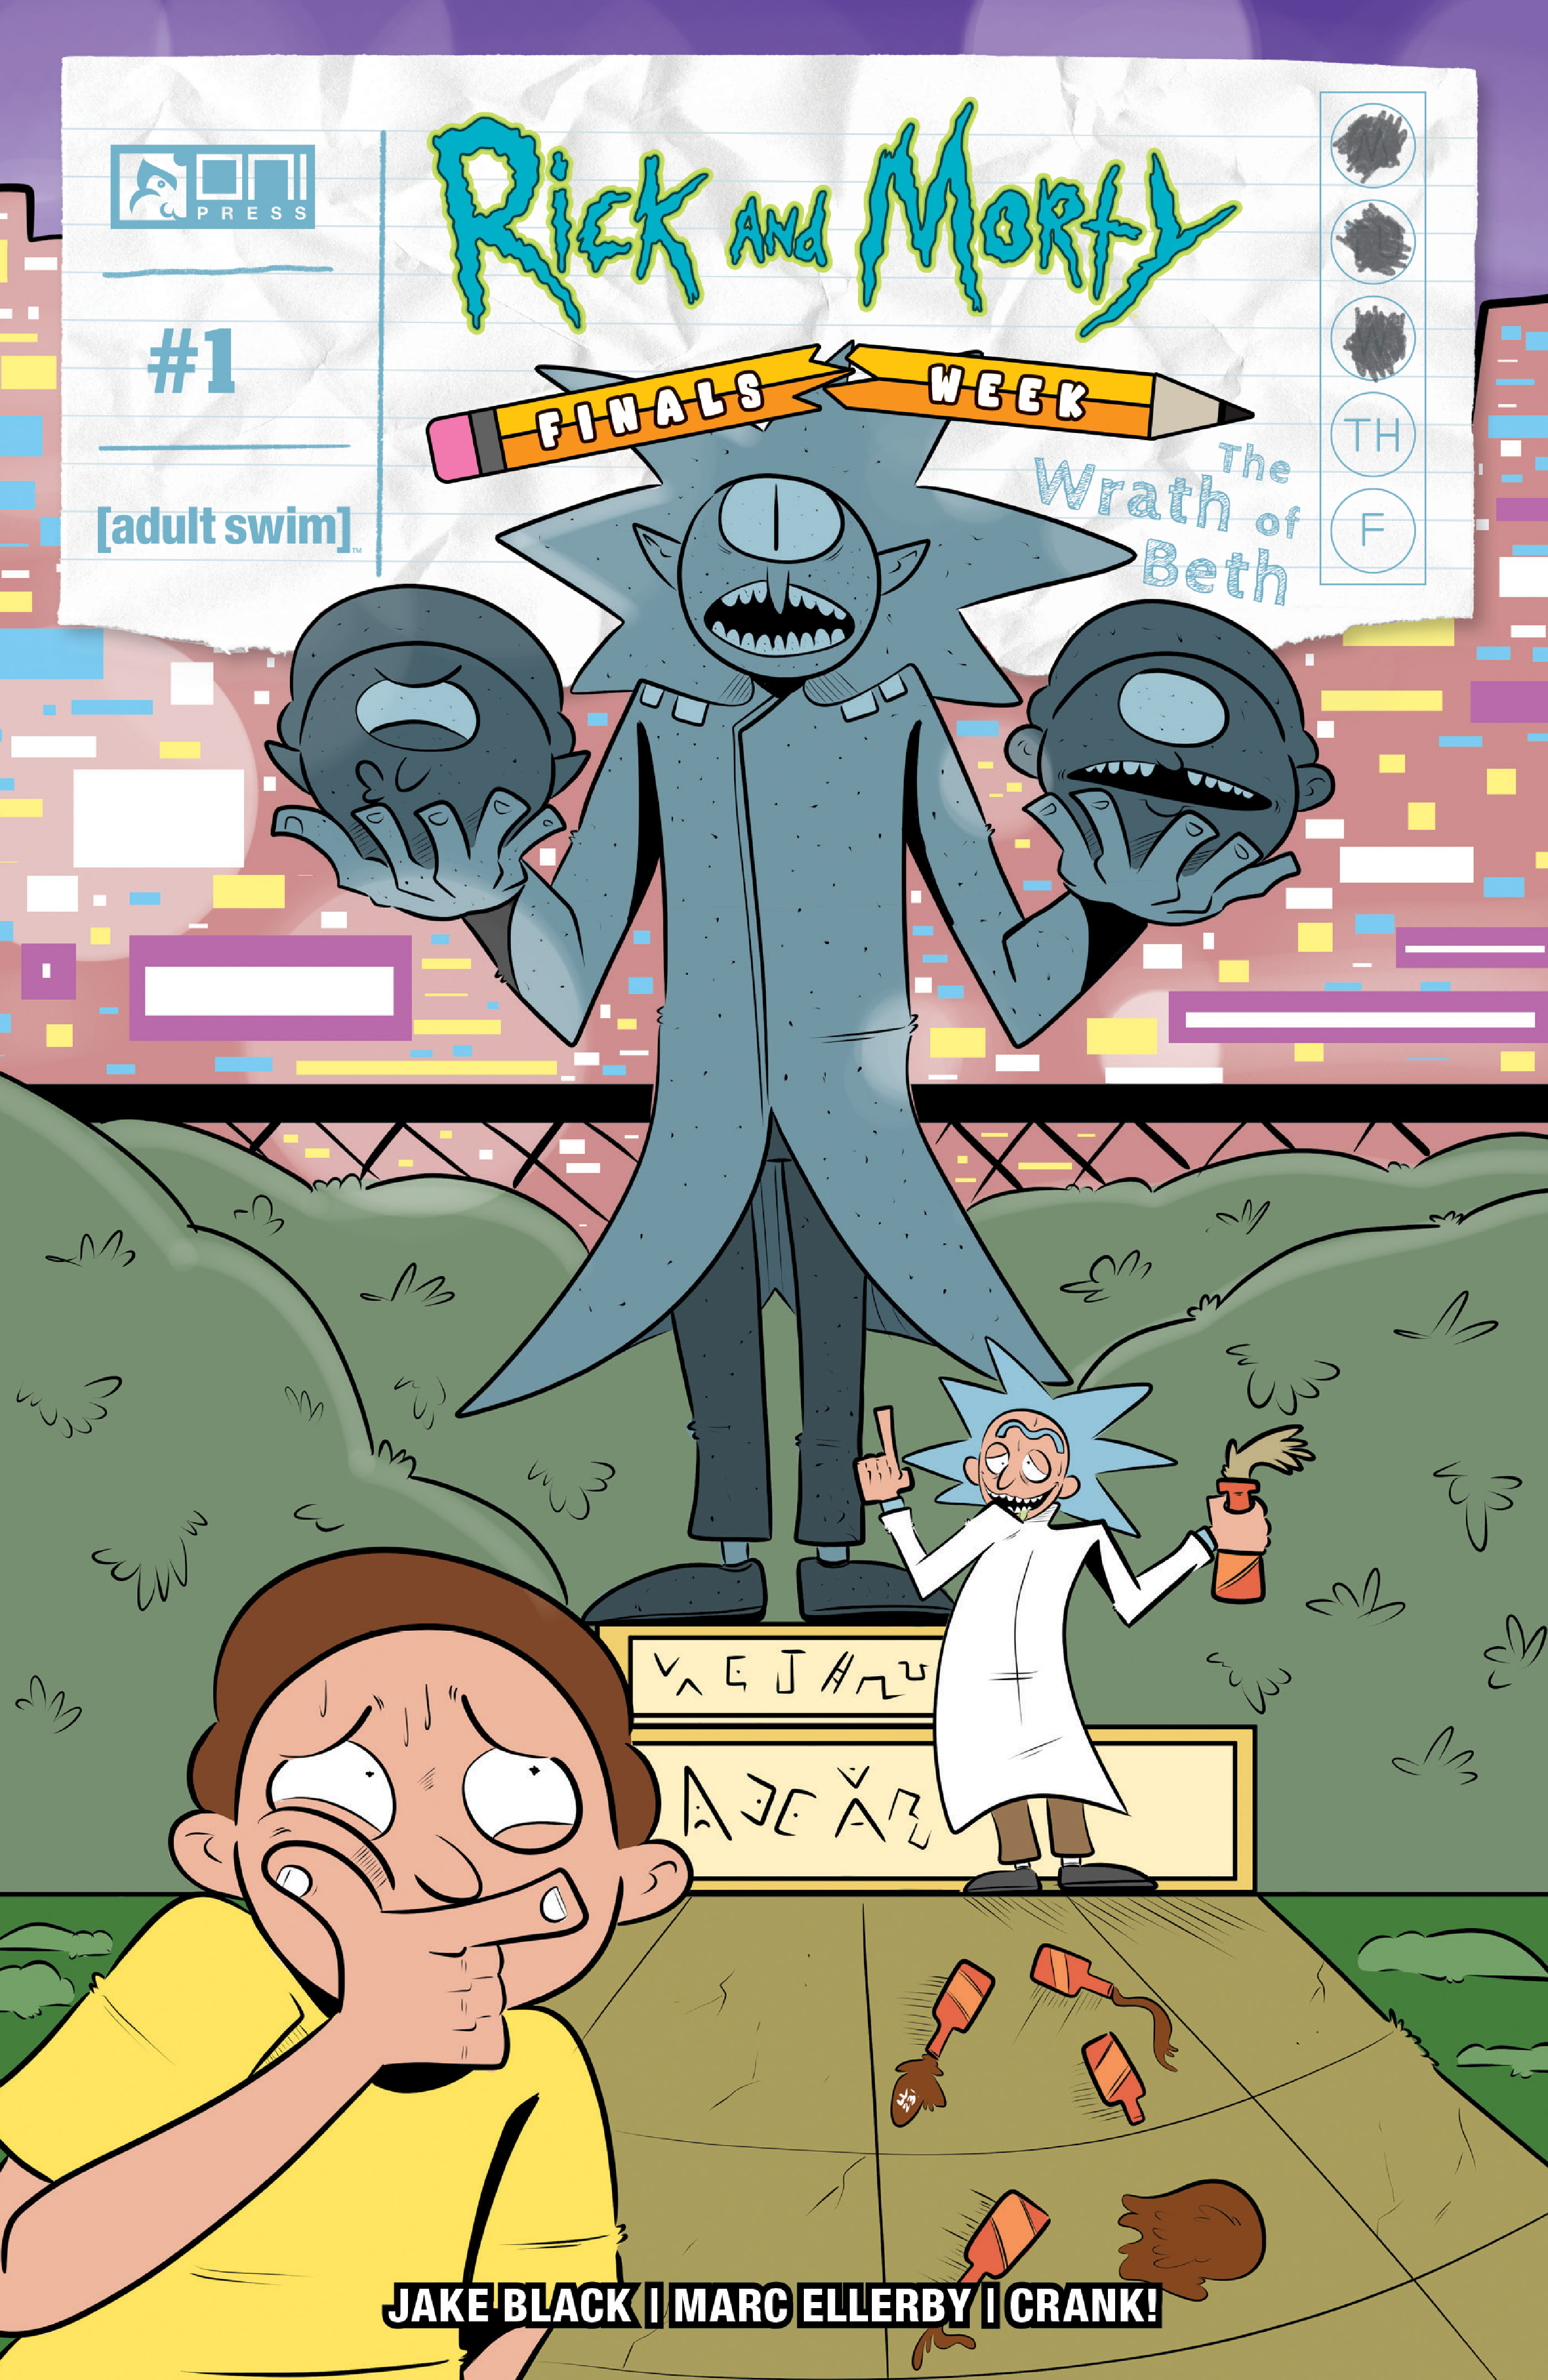 Rick and Morty Finals Week the Wrath of Beth #1 Cover B Lane Lloyd